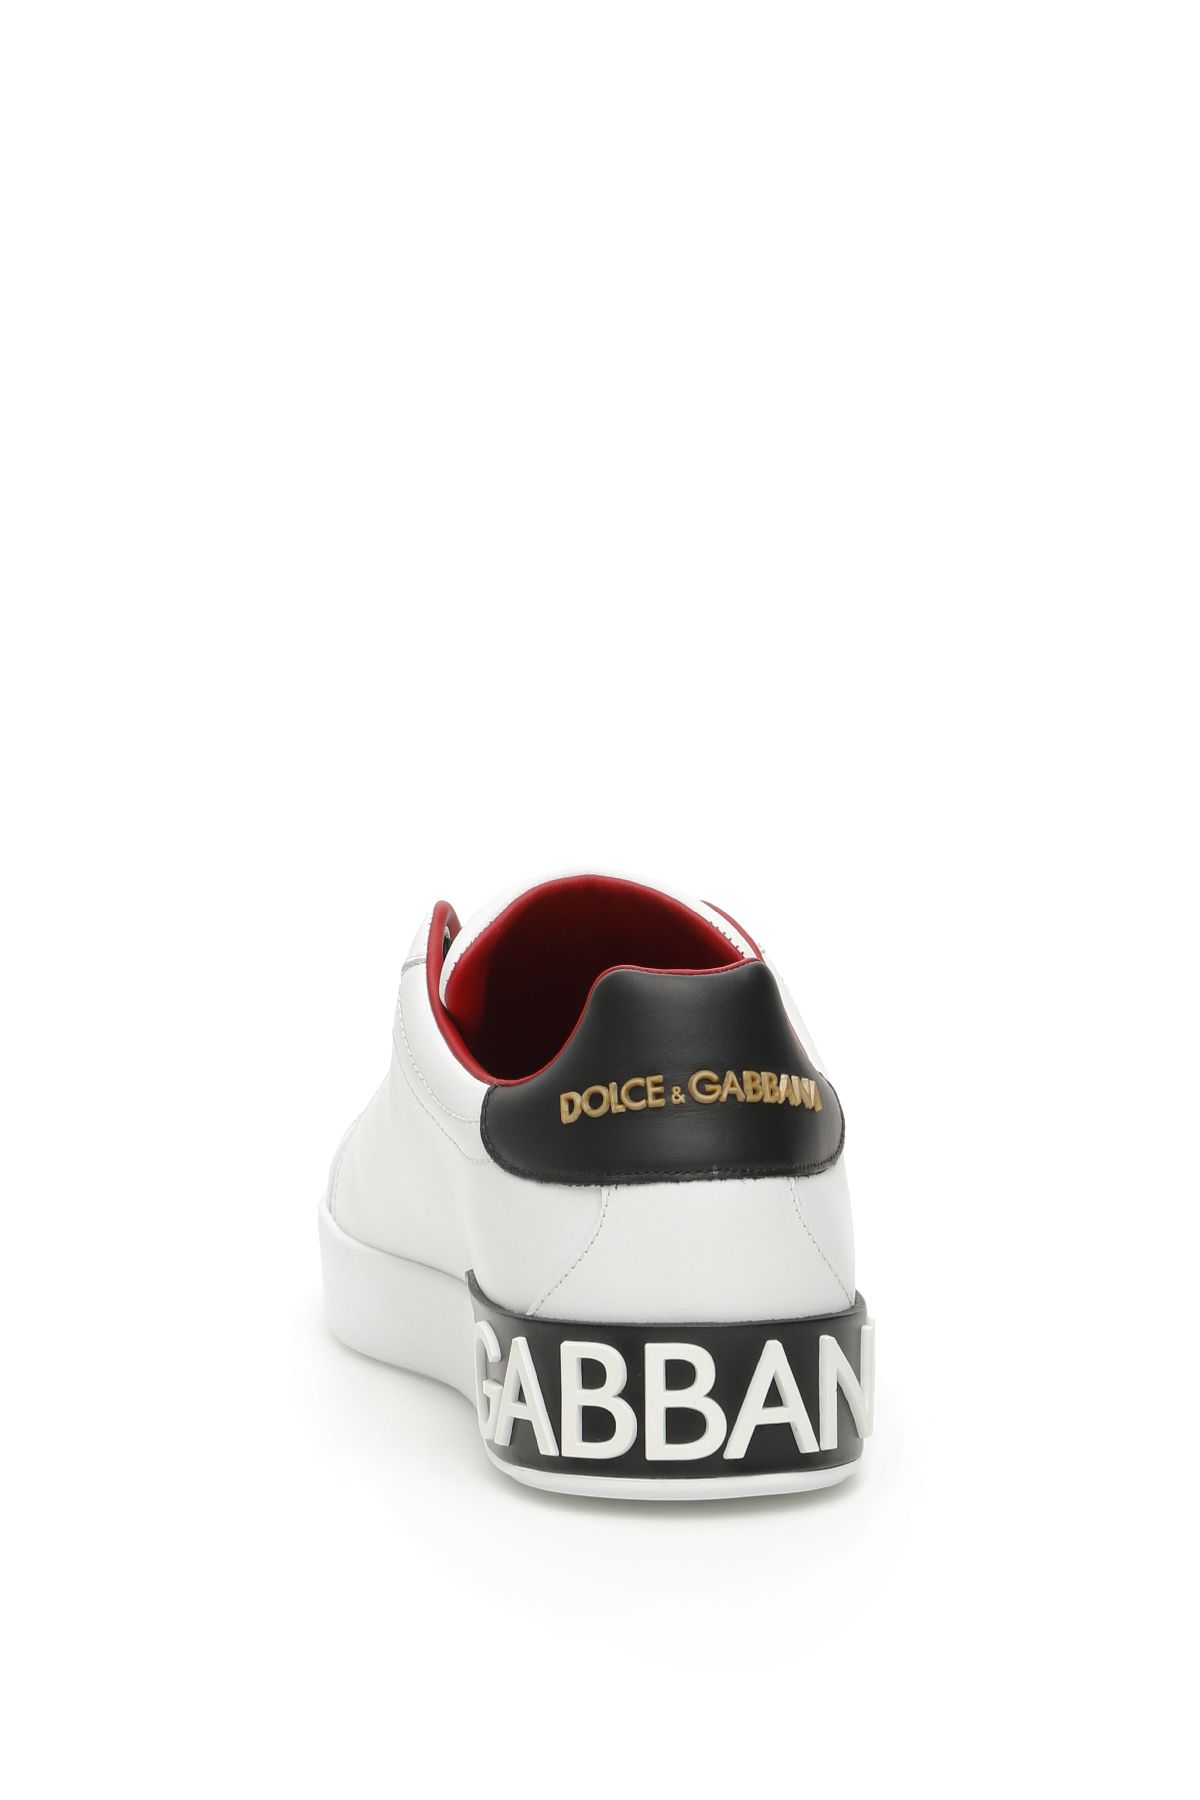 dolce gabbana pig sneakers